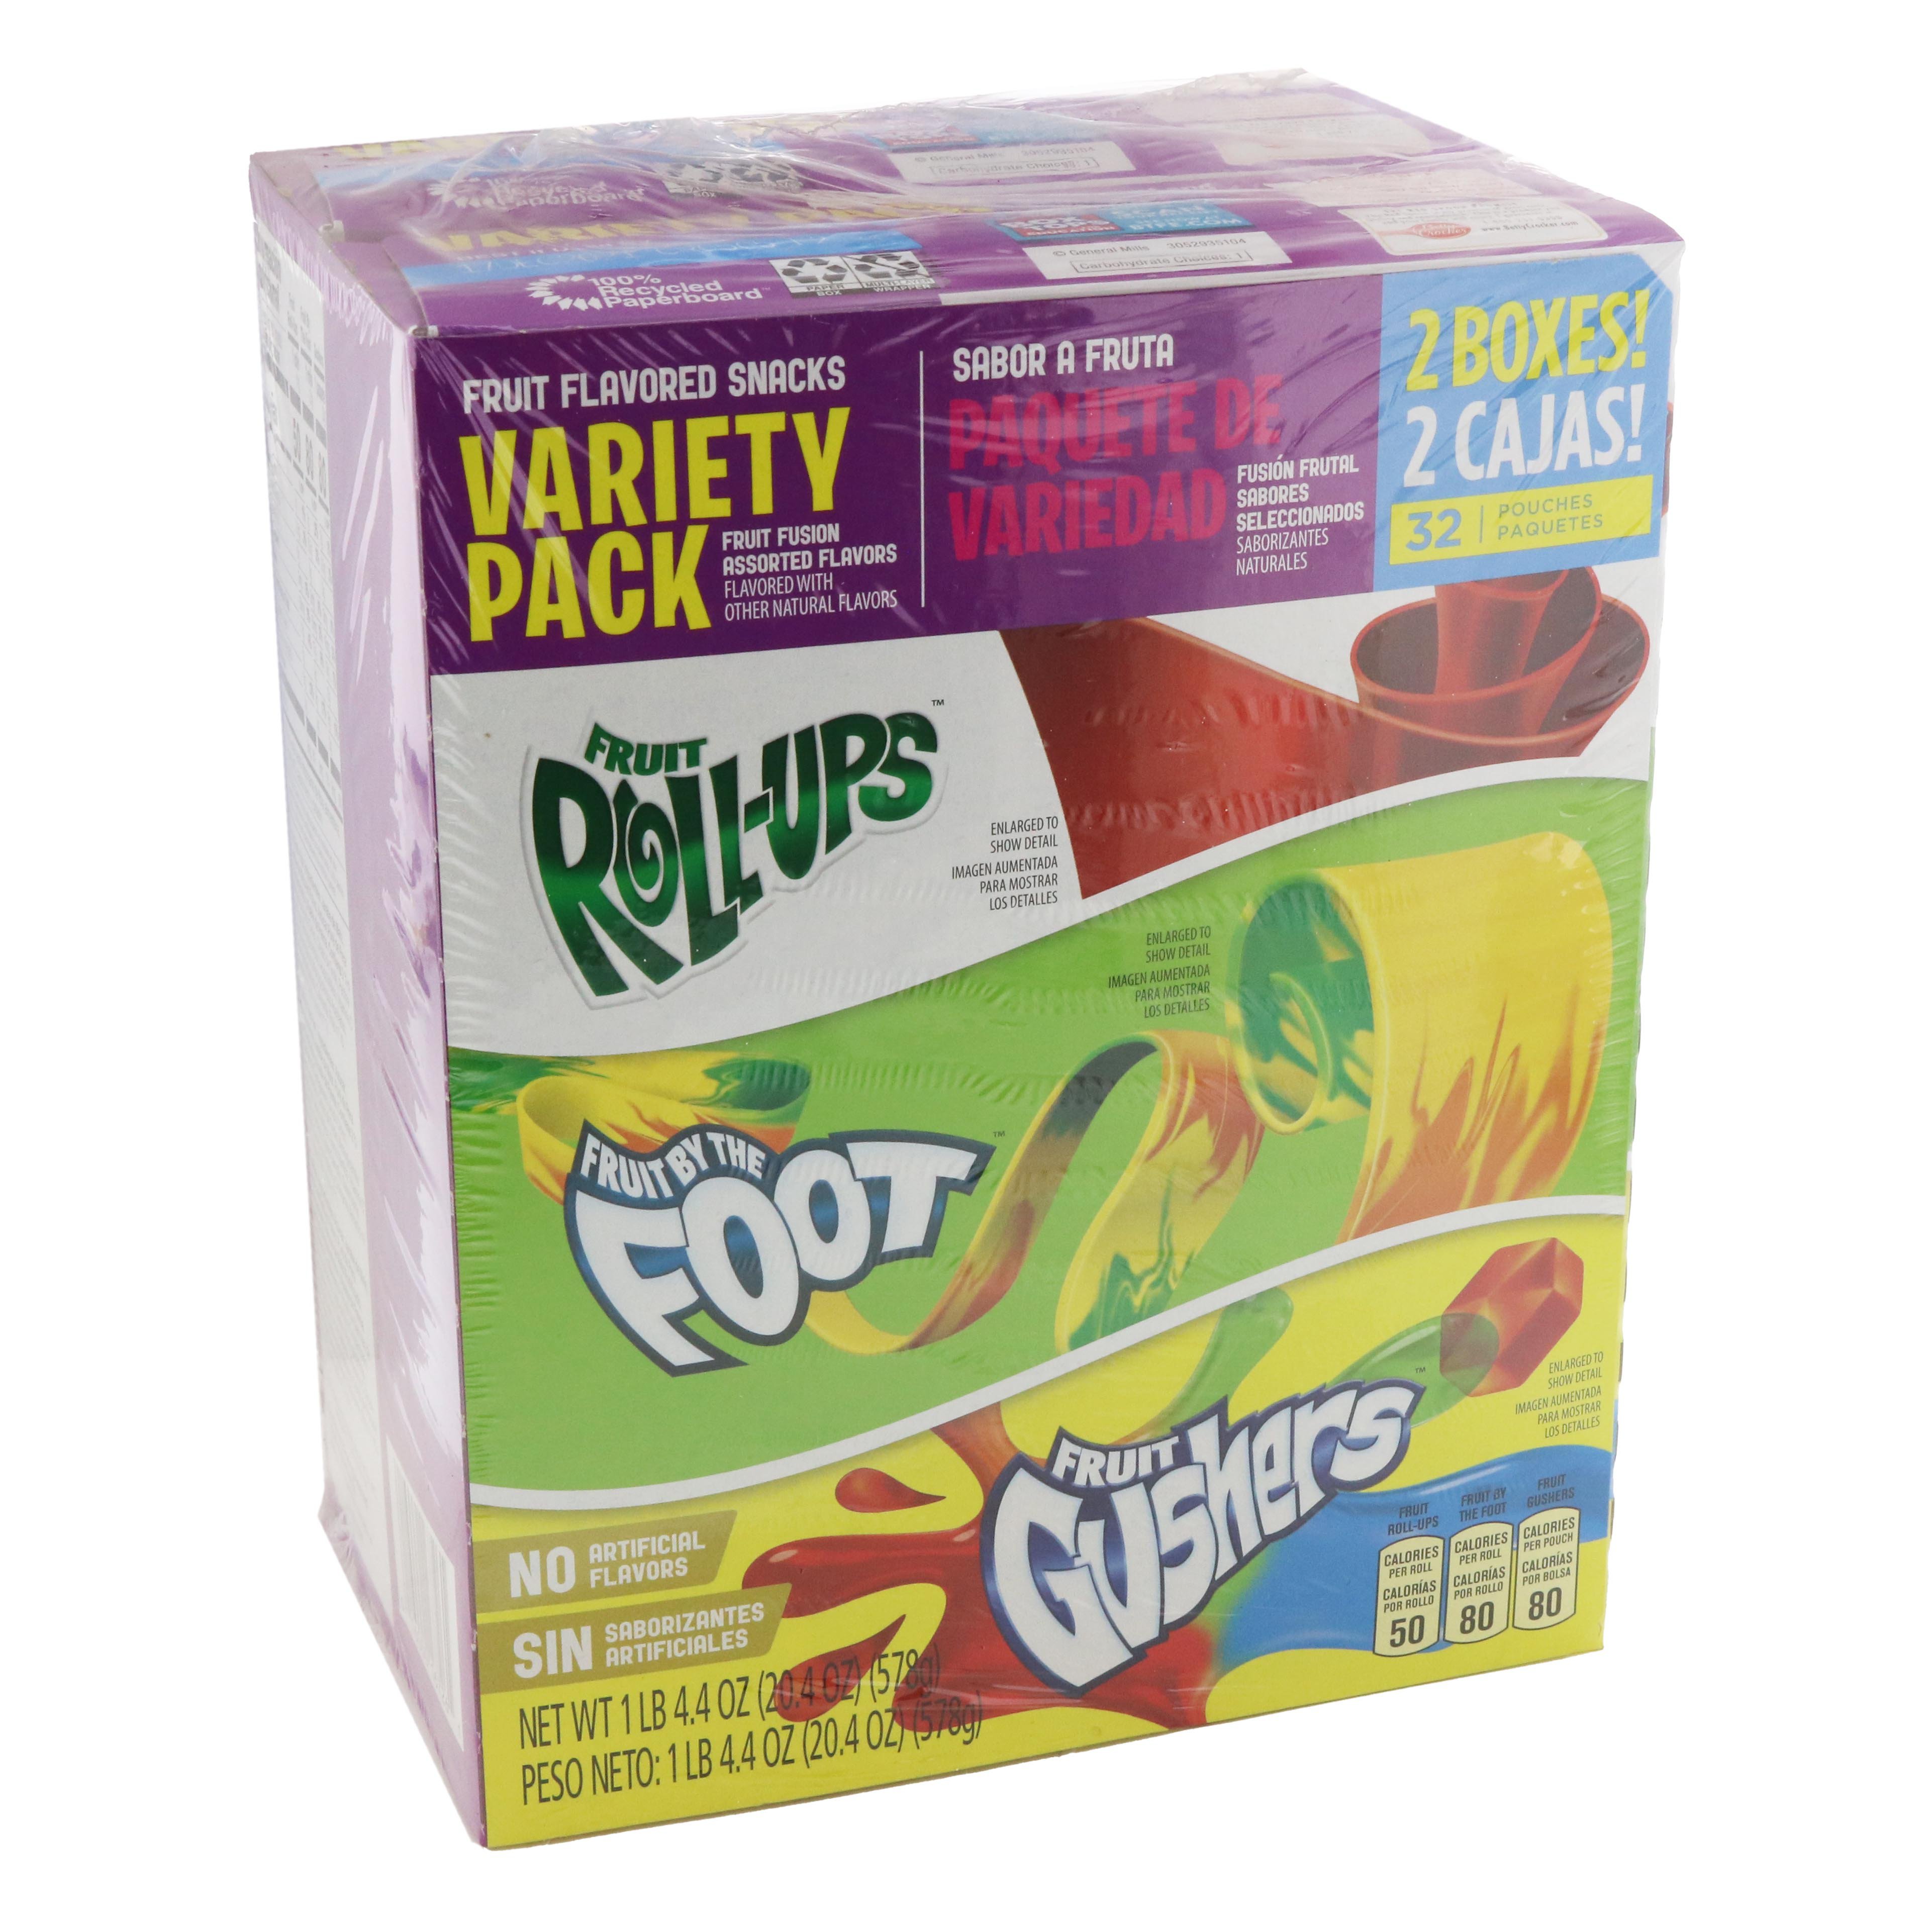 Fruit Roll Ups Fruit Flavored Snacks, Fruit Fusion Assorted